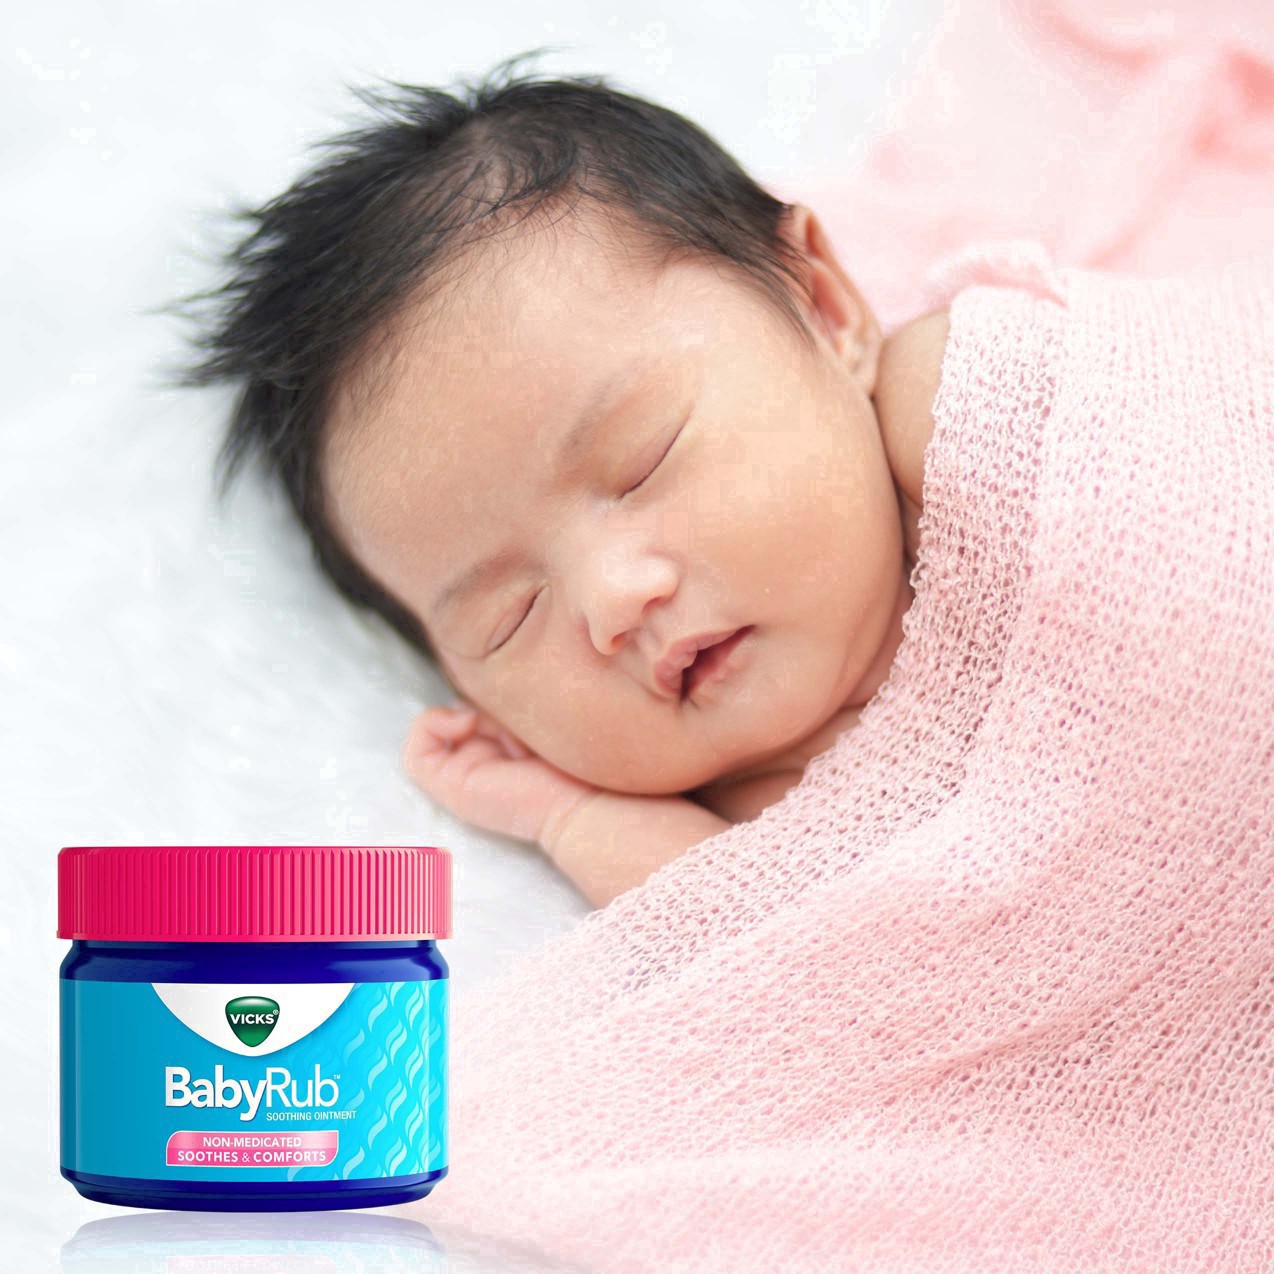 slide 71 of 78, Vicks BabyRub, Chest Rub Ointment with Soothing Aloe, Eucalyptus, Lavender, and Rosemary, from The Makers of VapoRub, 1.76 oz, 1.76 oz